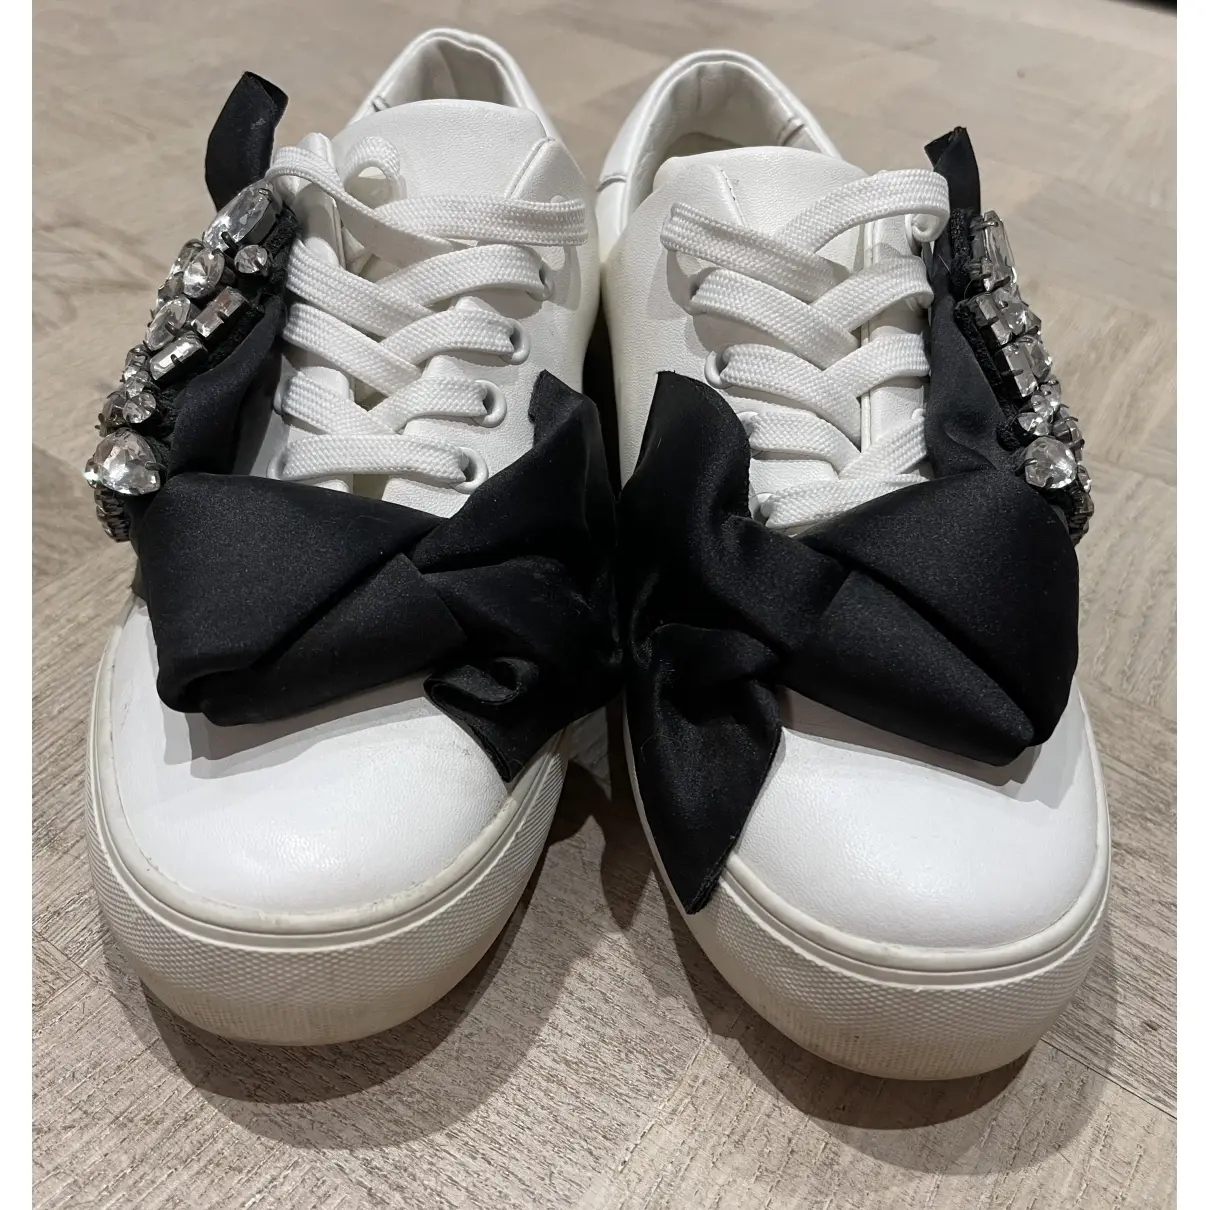 Buy Uterque Leather trainers online